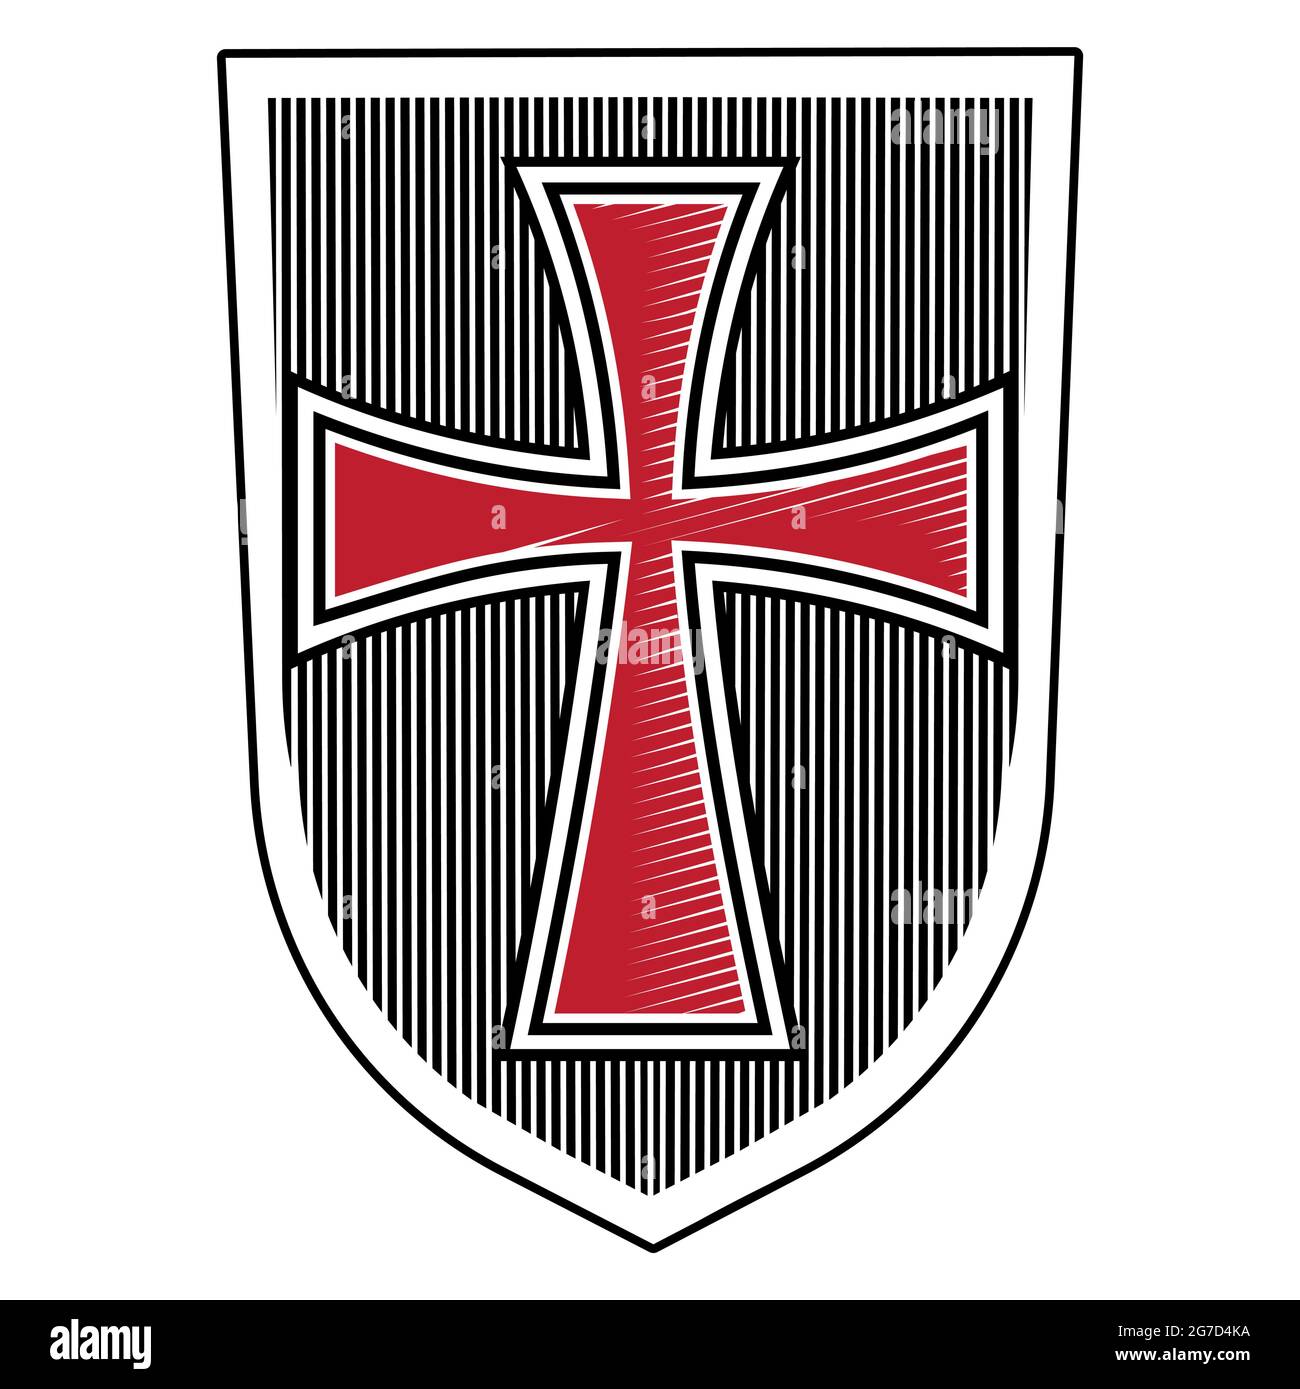 Knightly design. The heraldic shield of the Crusader Stock Vector